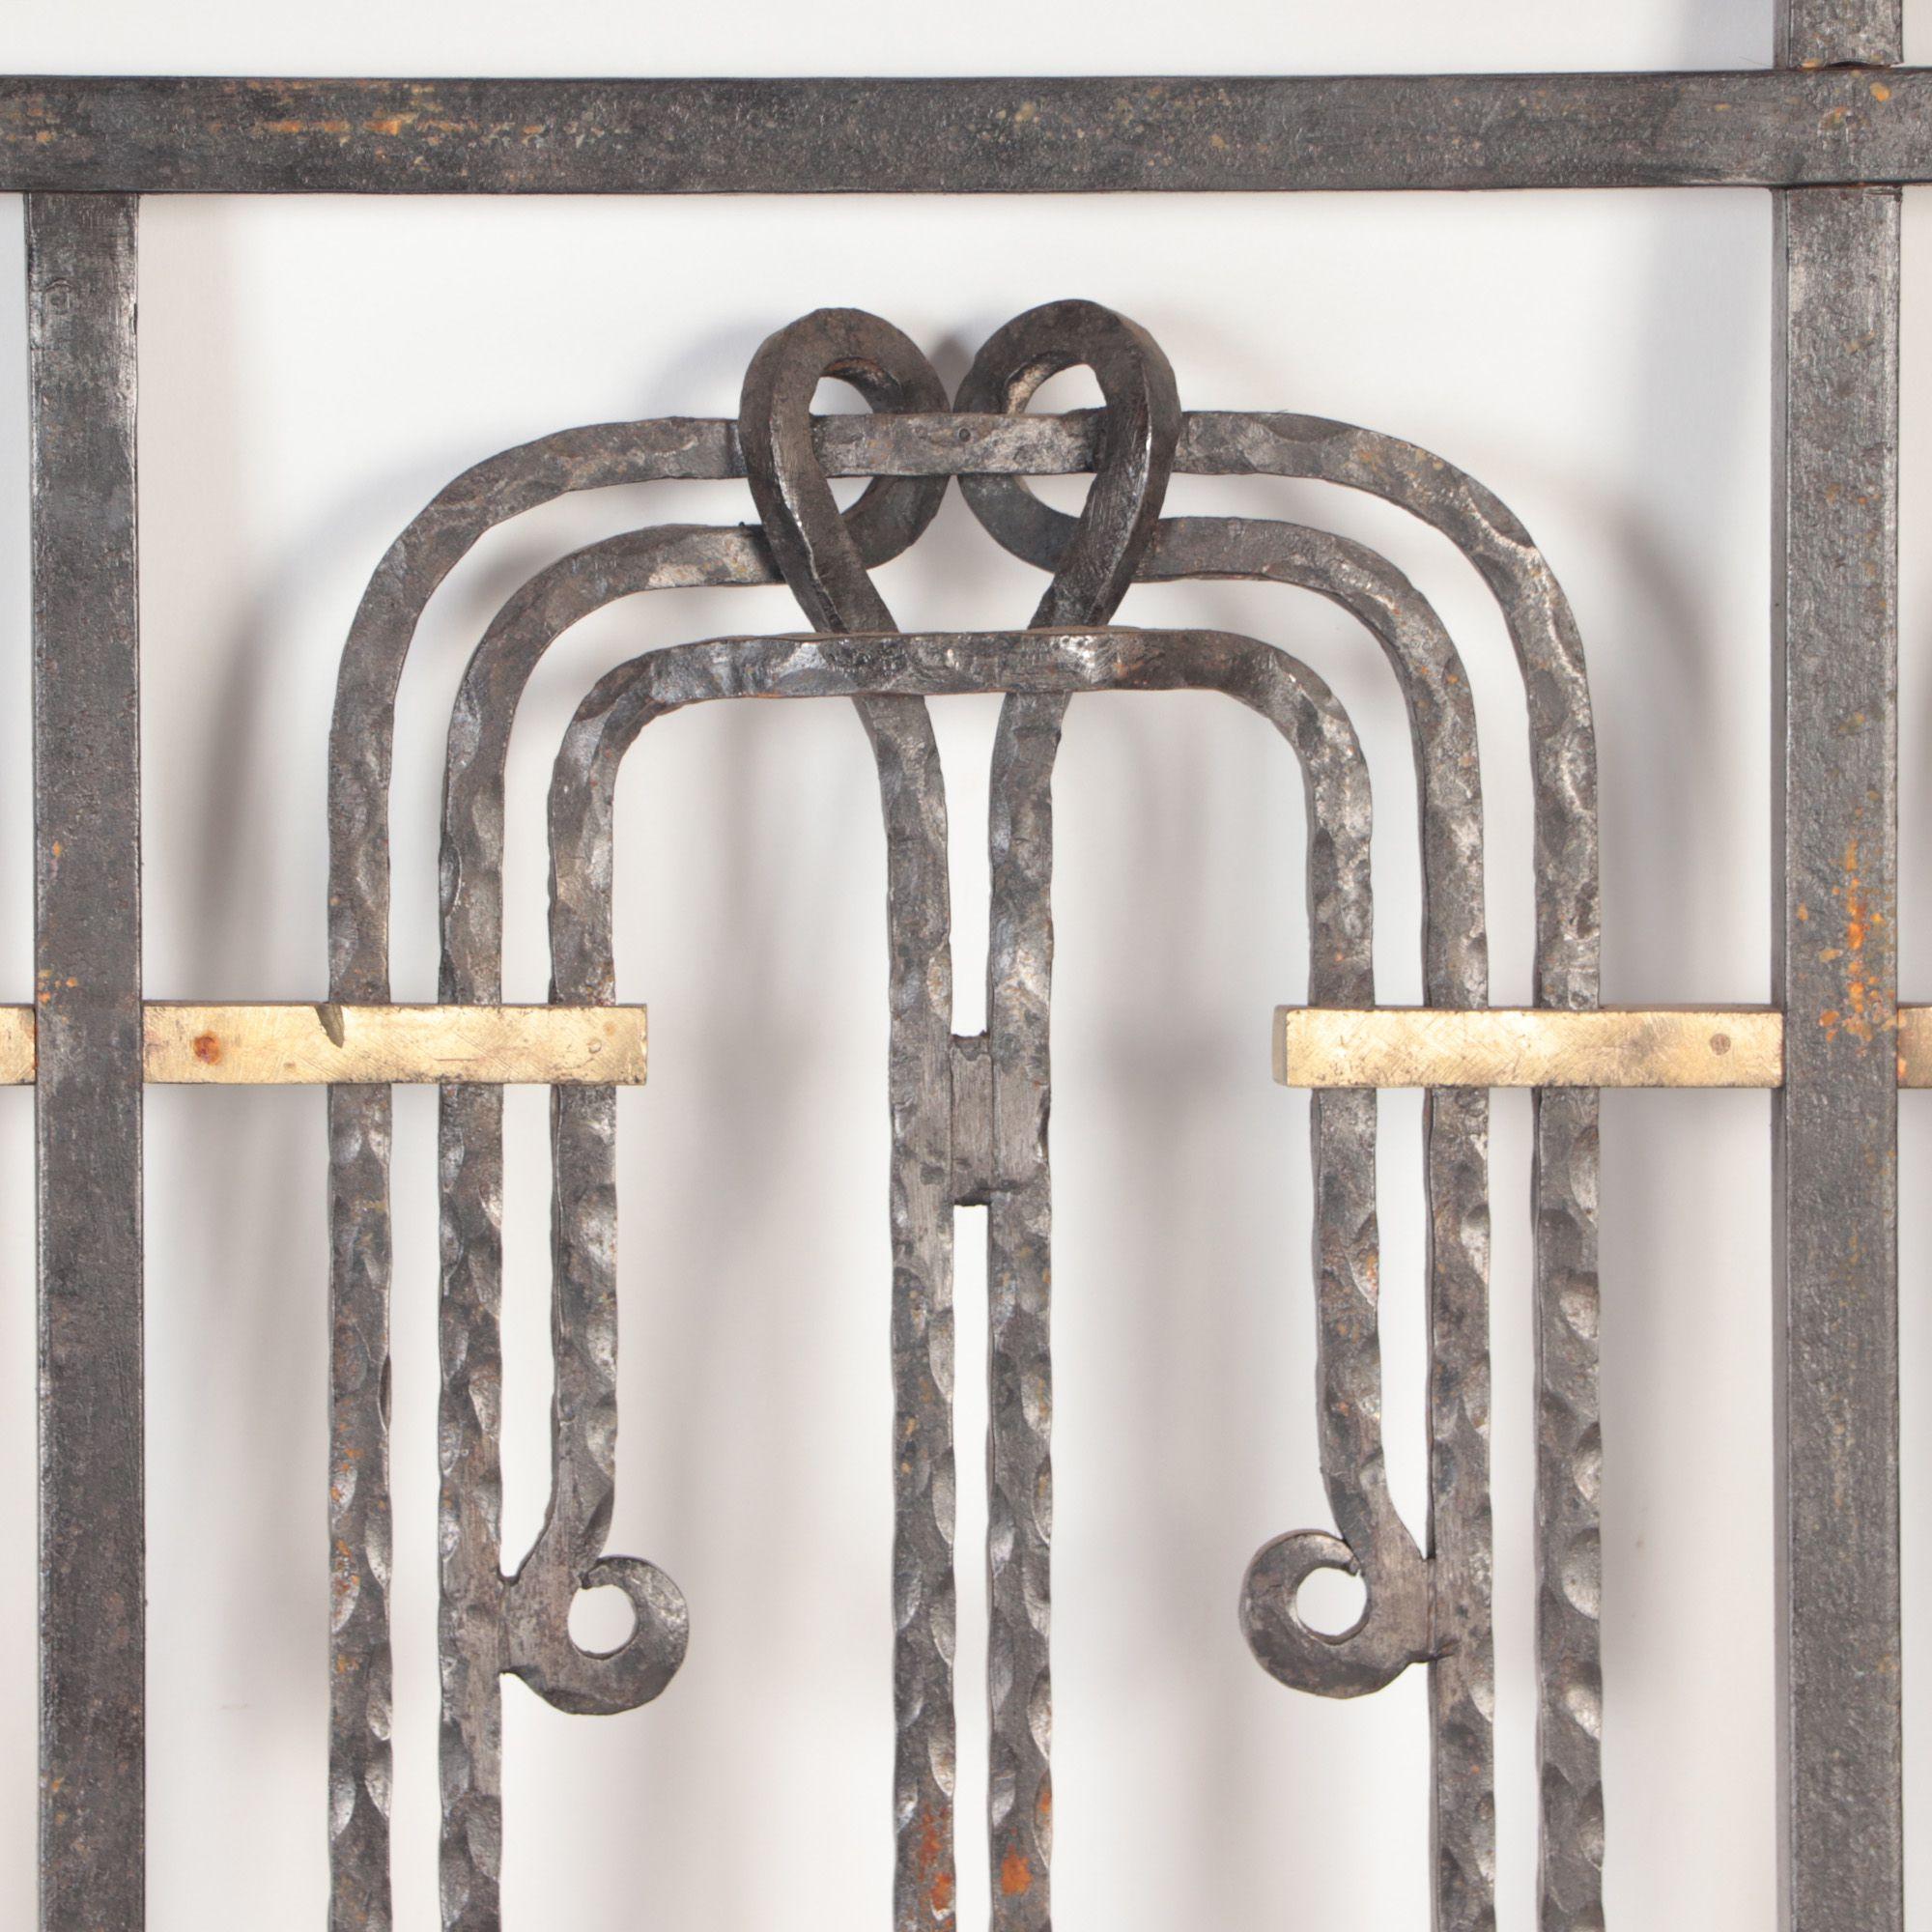 French Iron and Bronze Panel Designed by the Architect H. Sauvage, Early 20th  In Good Condition For Sale In Philadelphia, PA